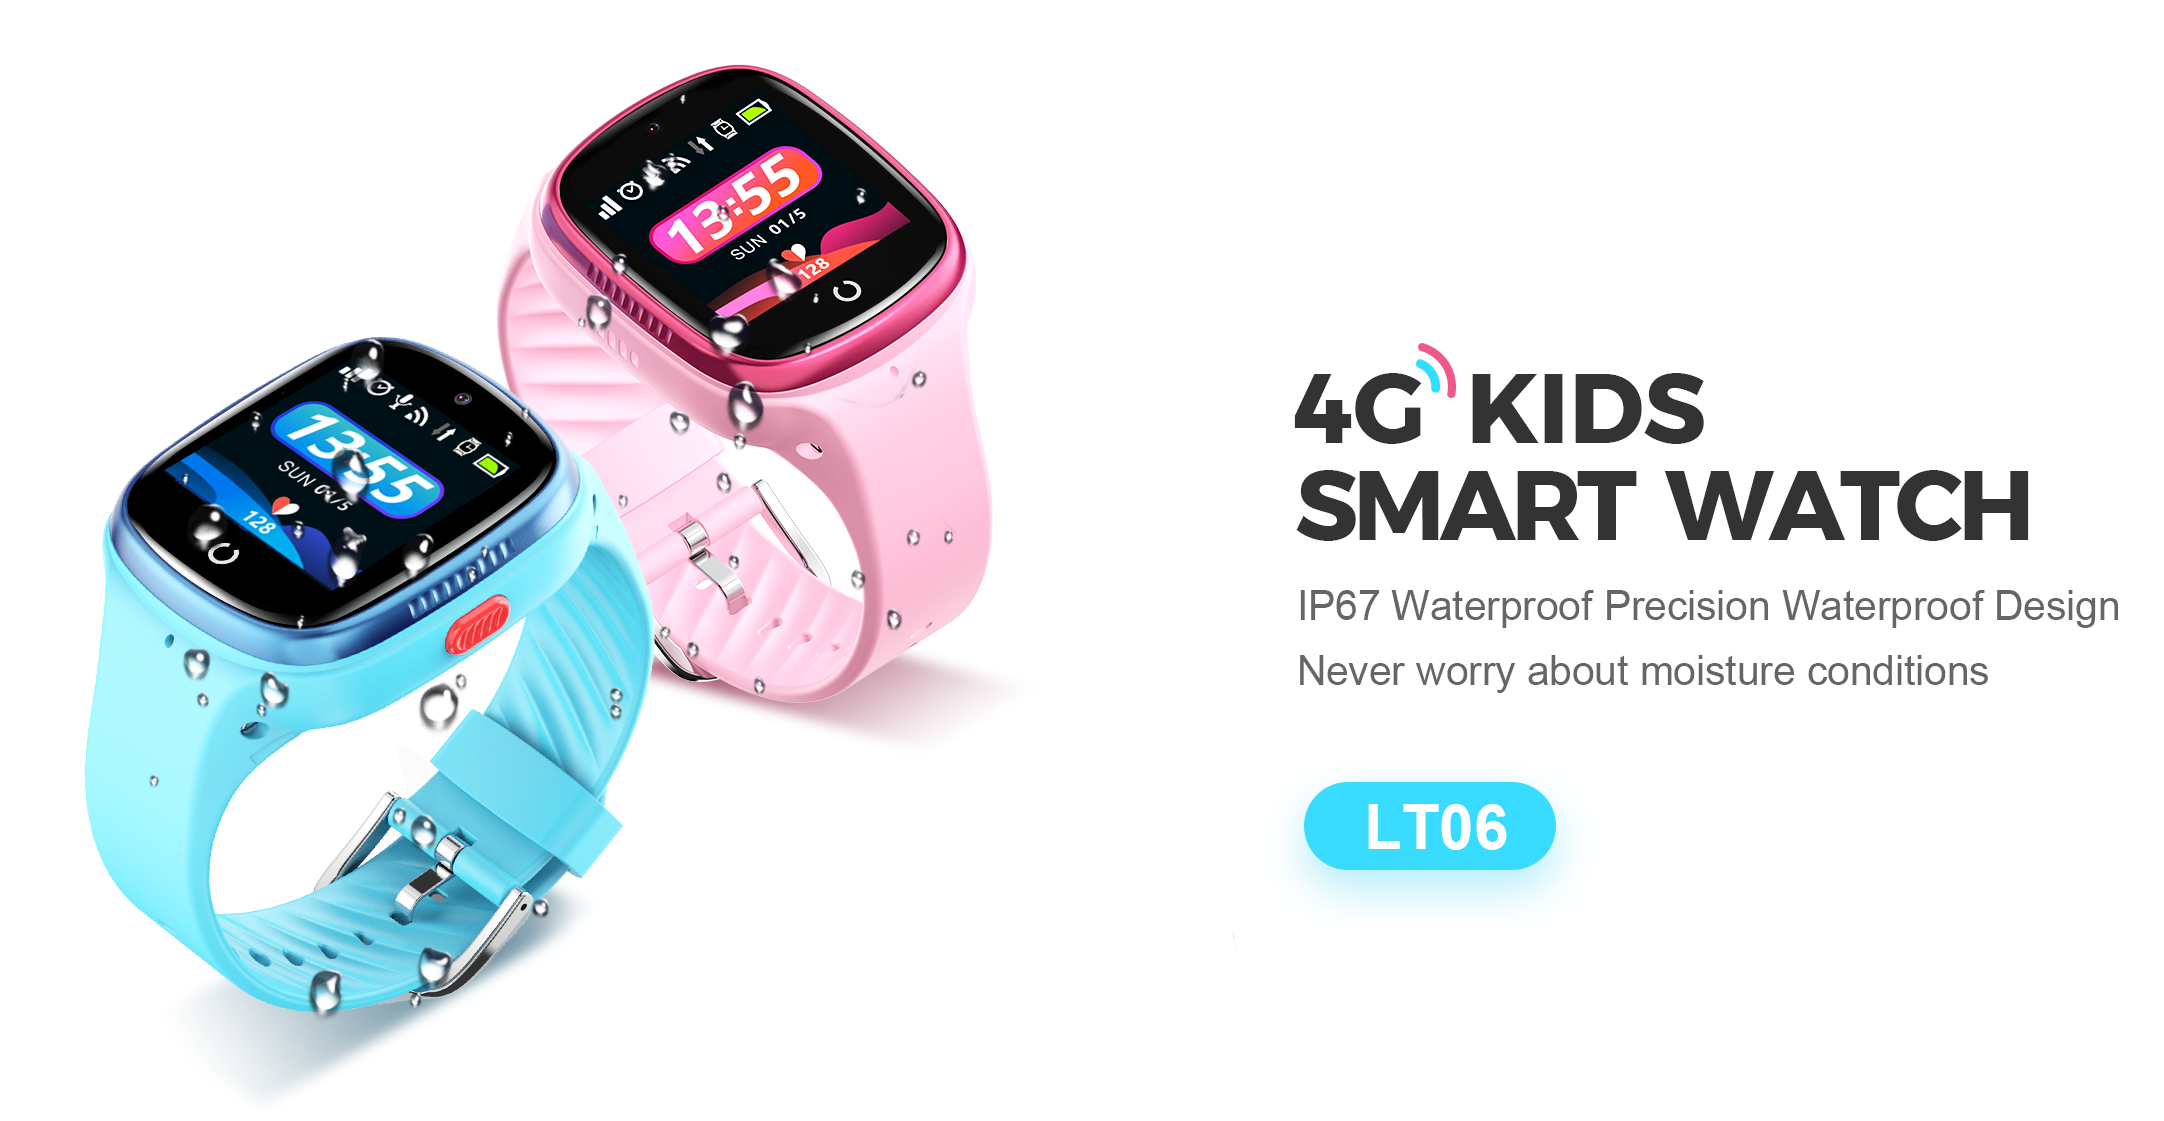 4G LTE Smartwatch with GPS Video Calling IPX7 waterproof for Kids